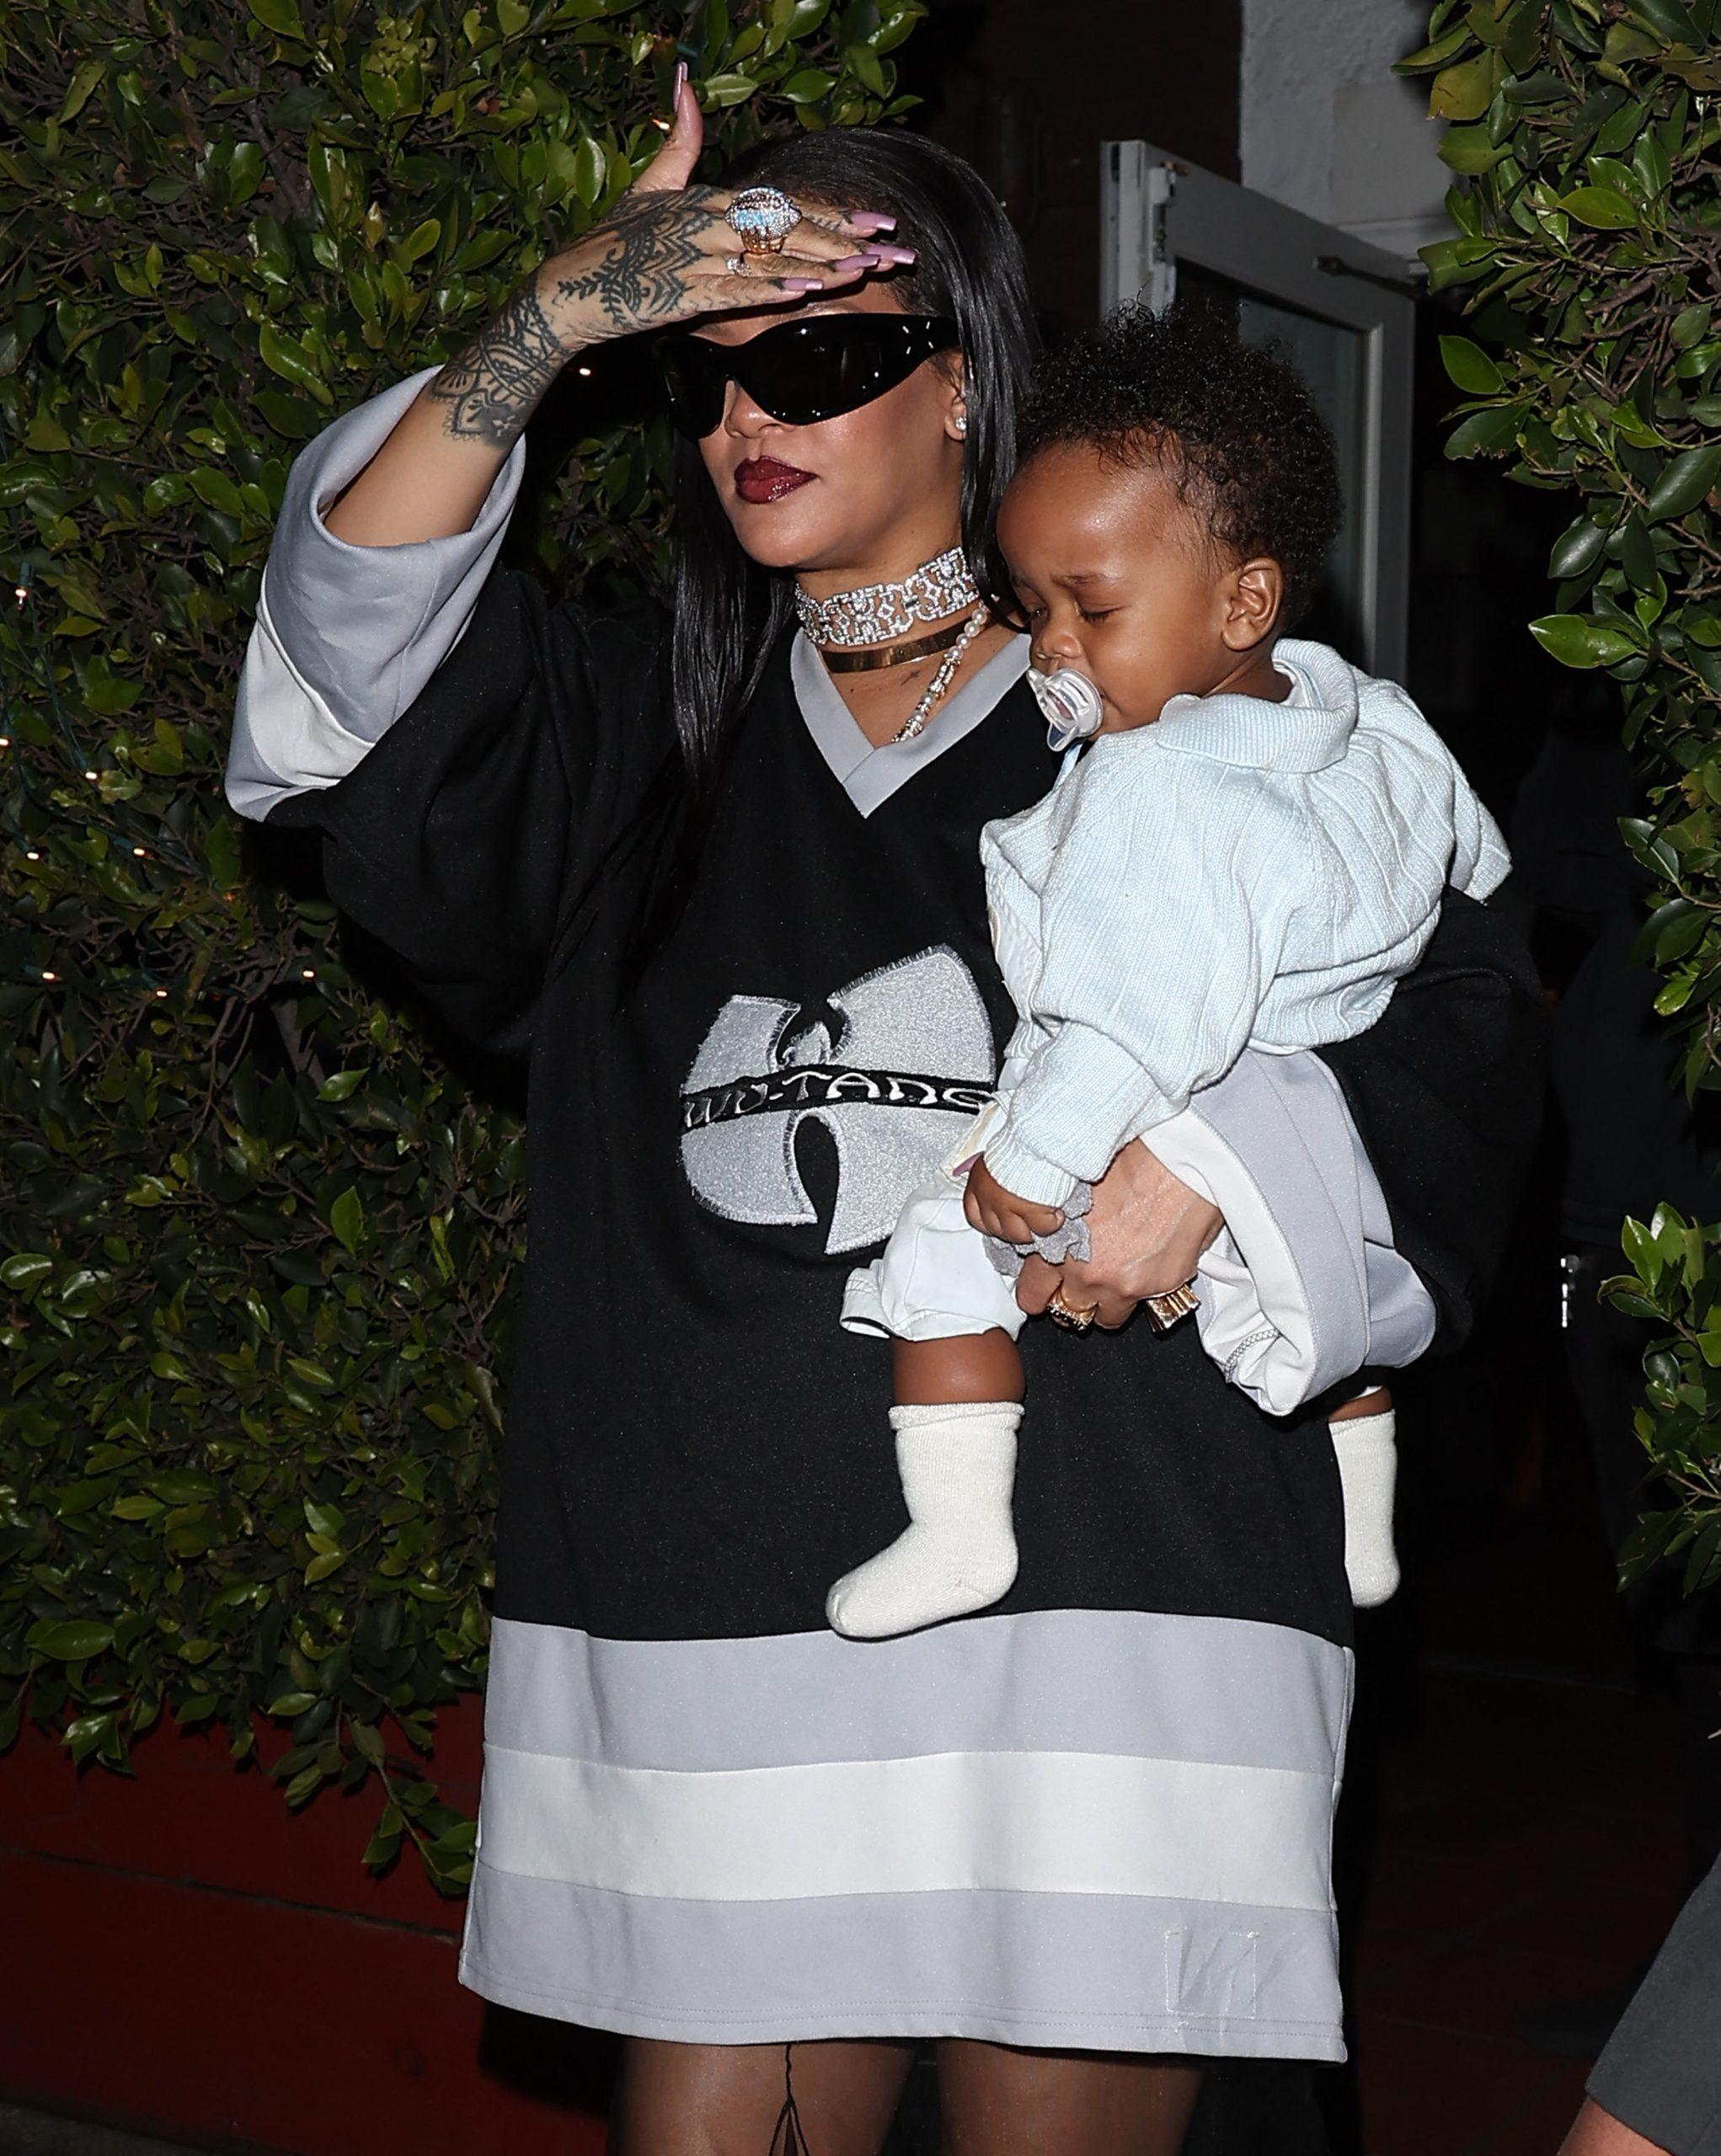 Rihanna Takes Maternity Fashion To The Next Level In Stunning Wu-Tang Shirt Dress, Shows Off Baby Bump